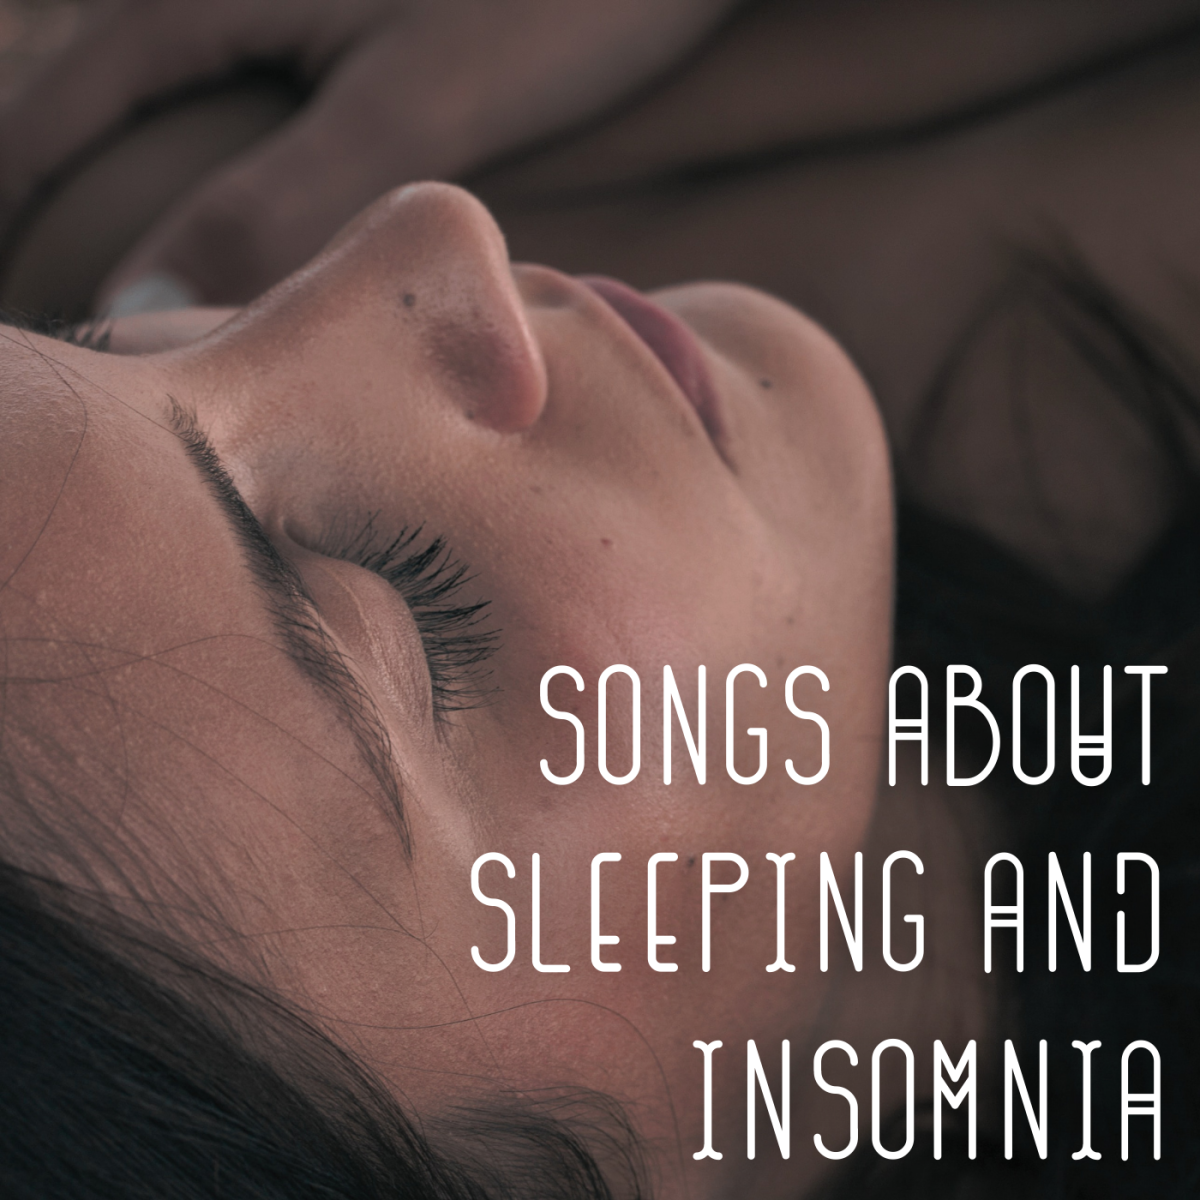 63 Songs About Sleeping and Insomnia